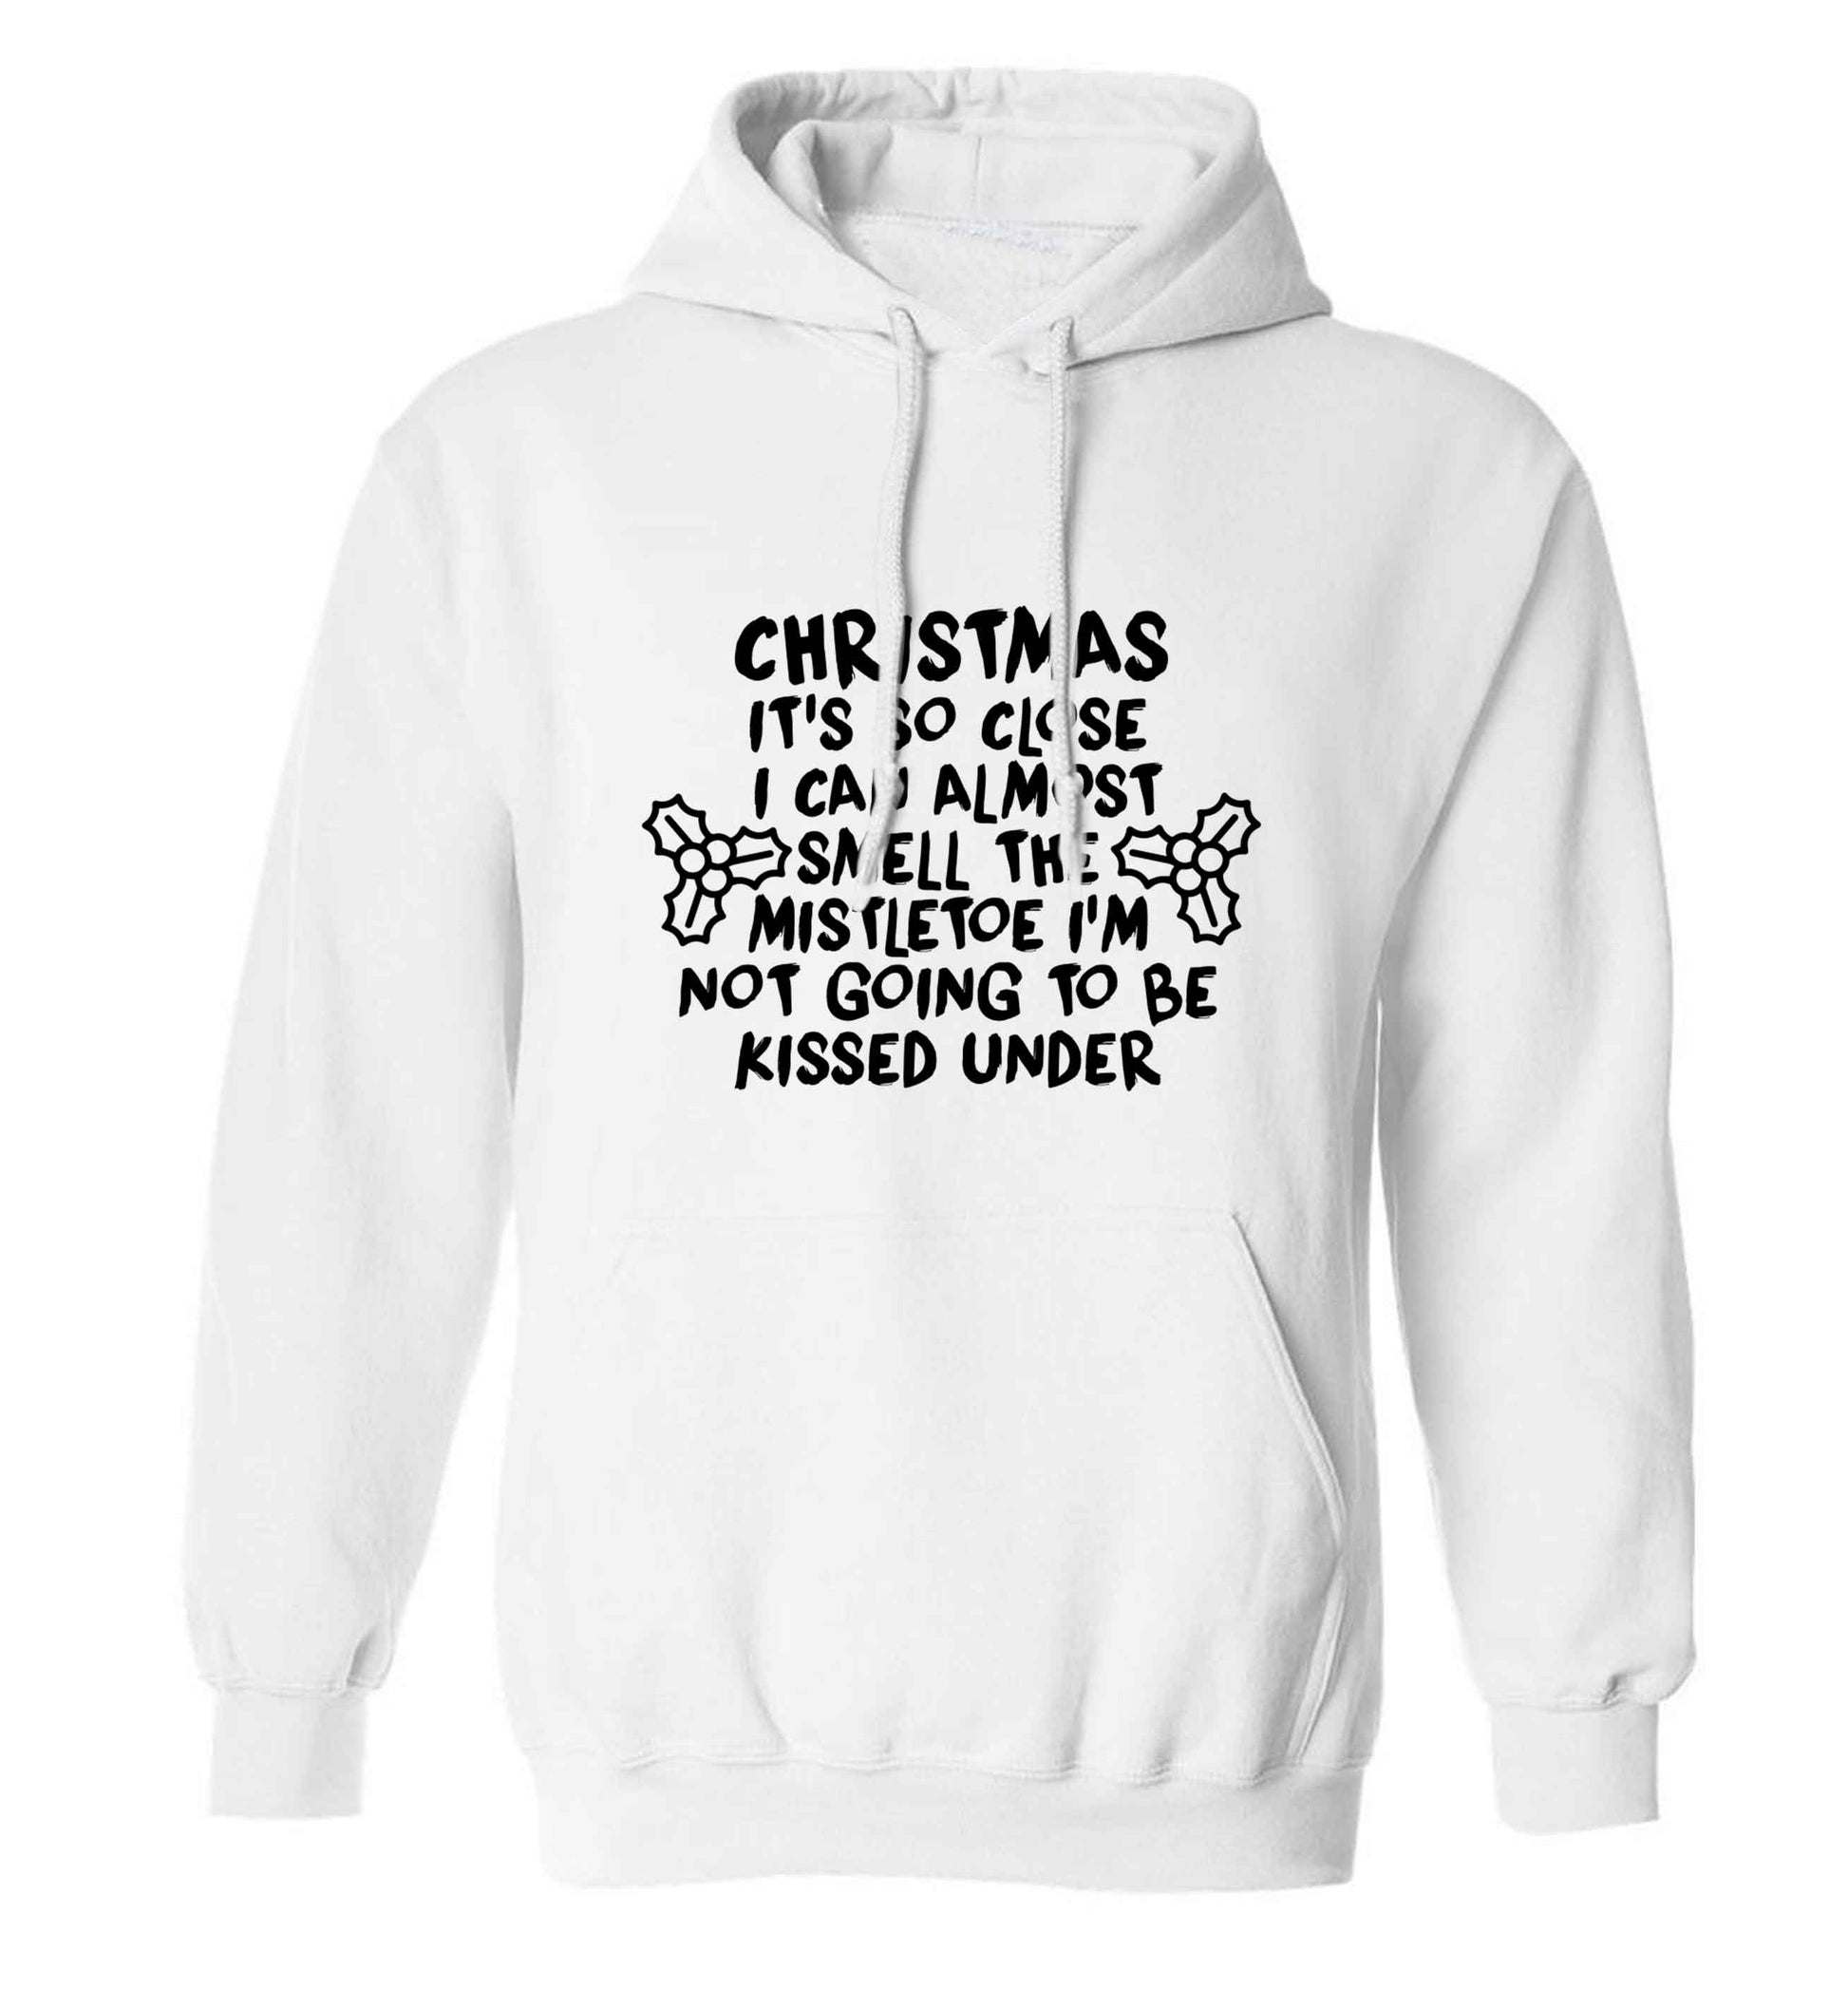 Christmas it's so close I can almost smell the misteltoe I'm not going to be kissed under adults unisex white hoodie 2XL